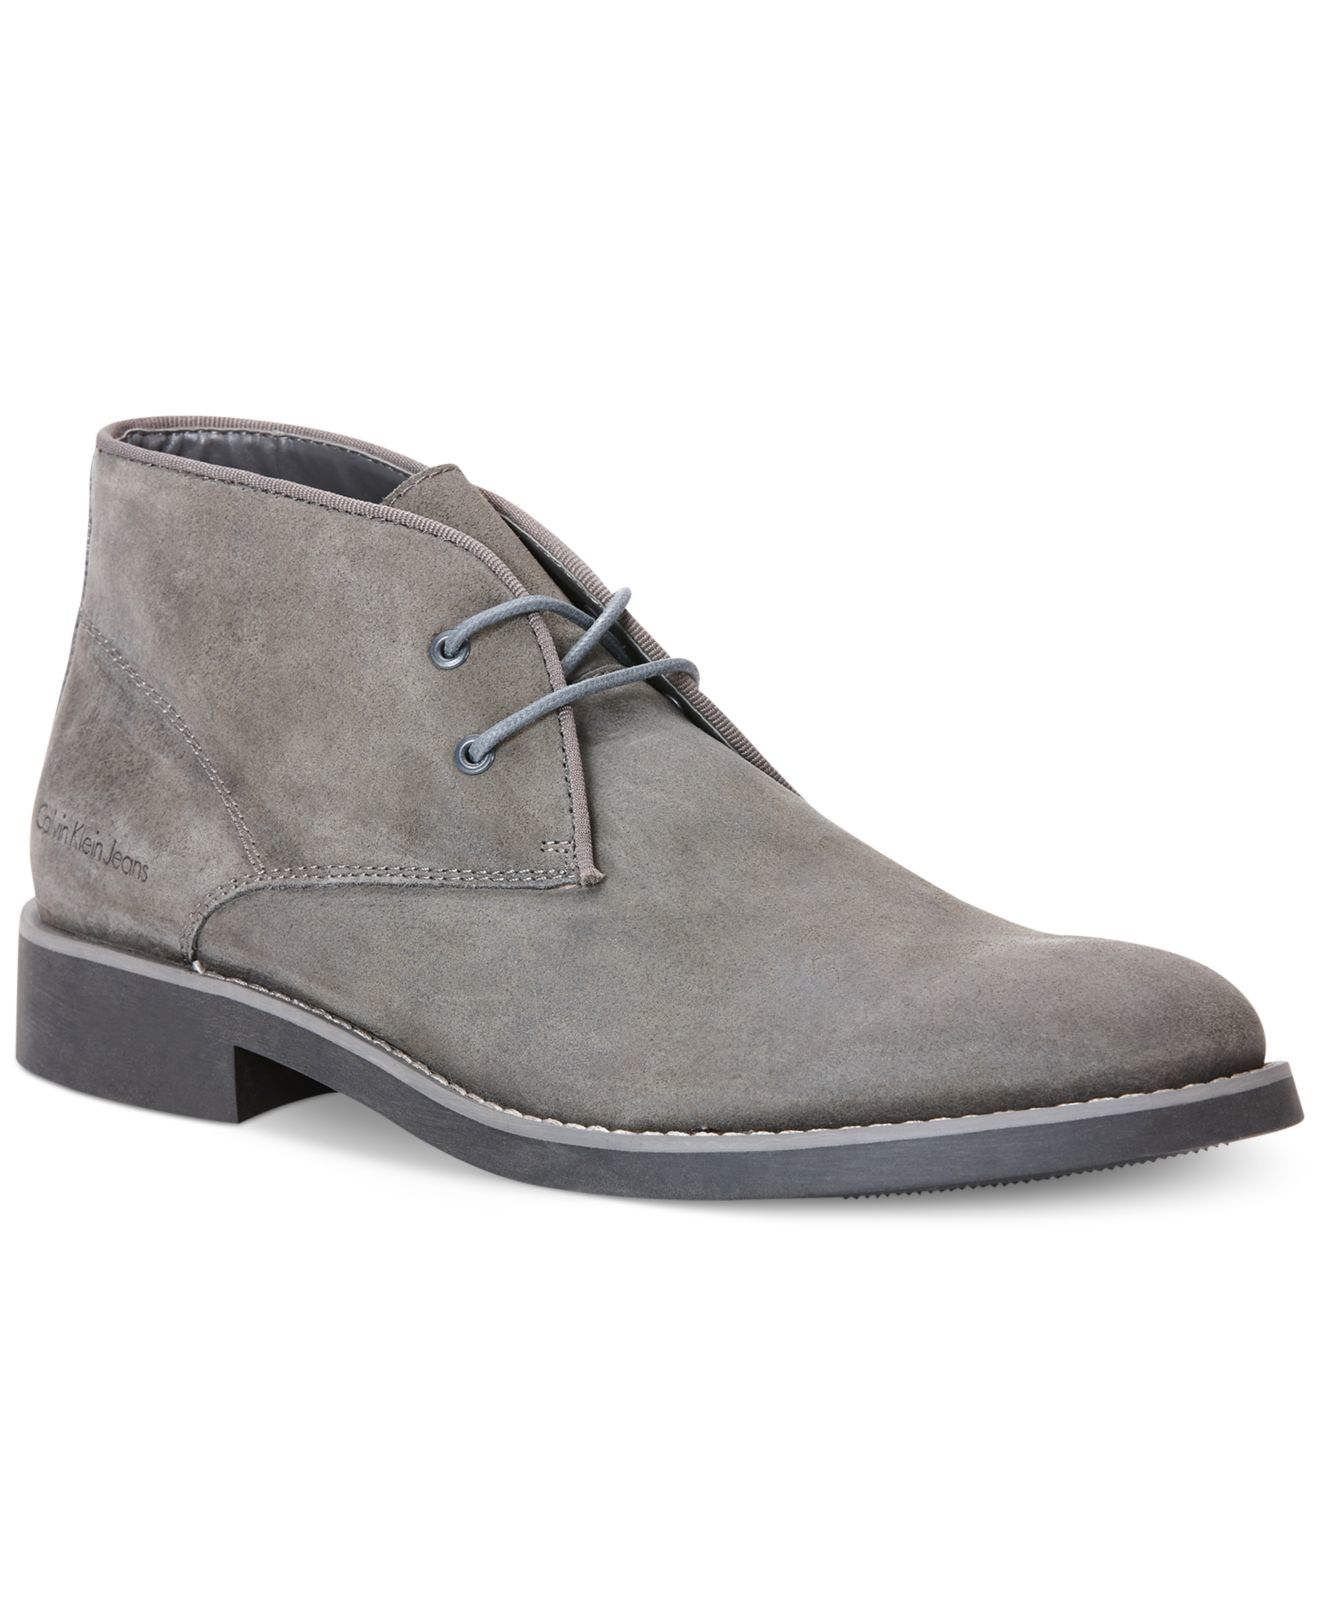 Lyst - Calvin Klein Jeans Marston Suede Chukka Boots in Gray for Men